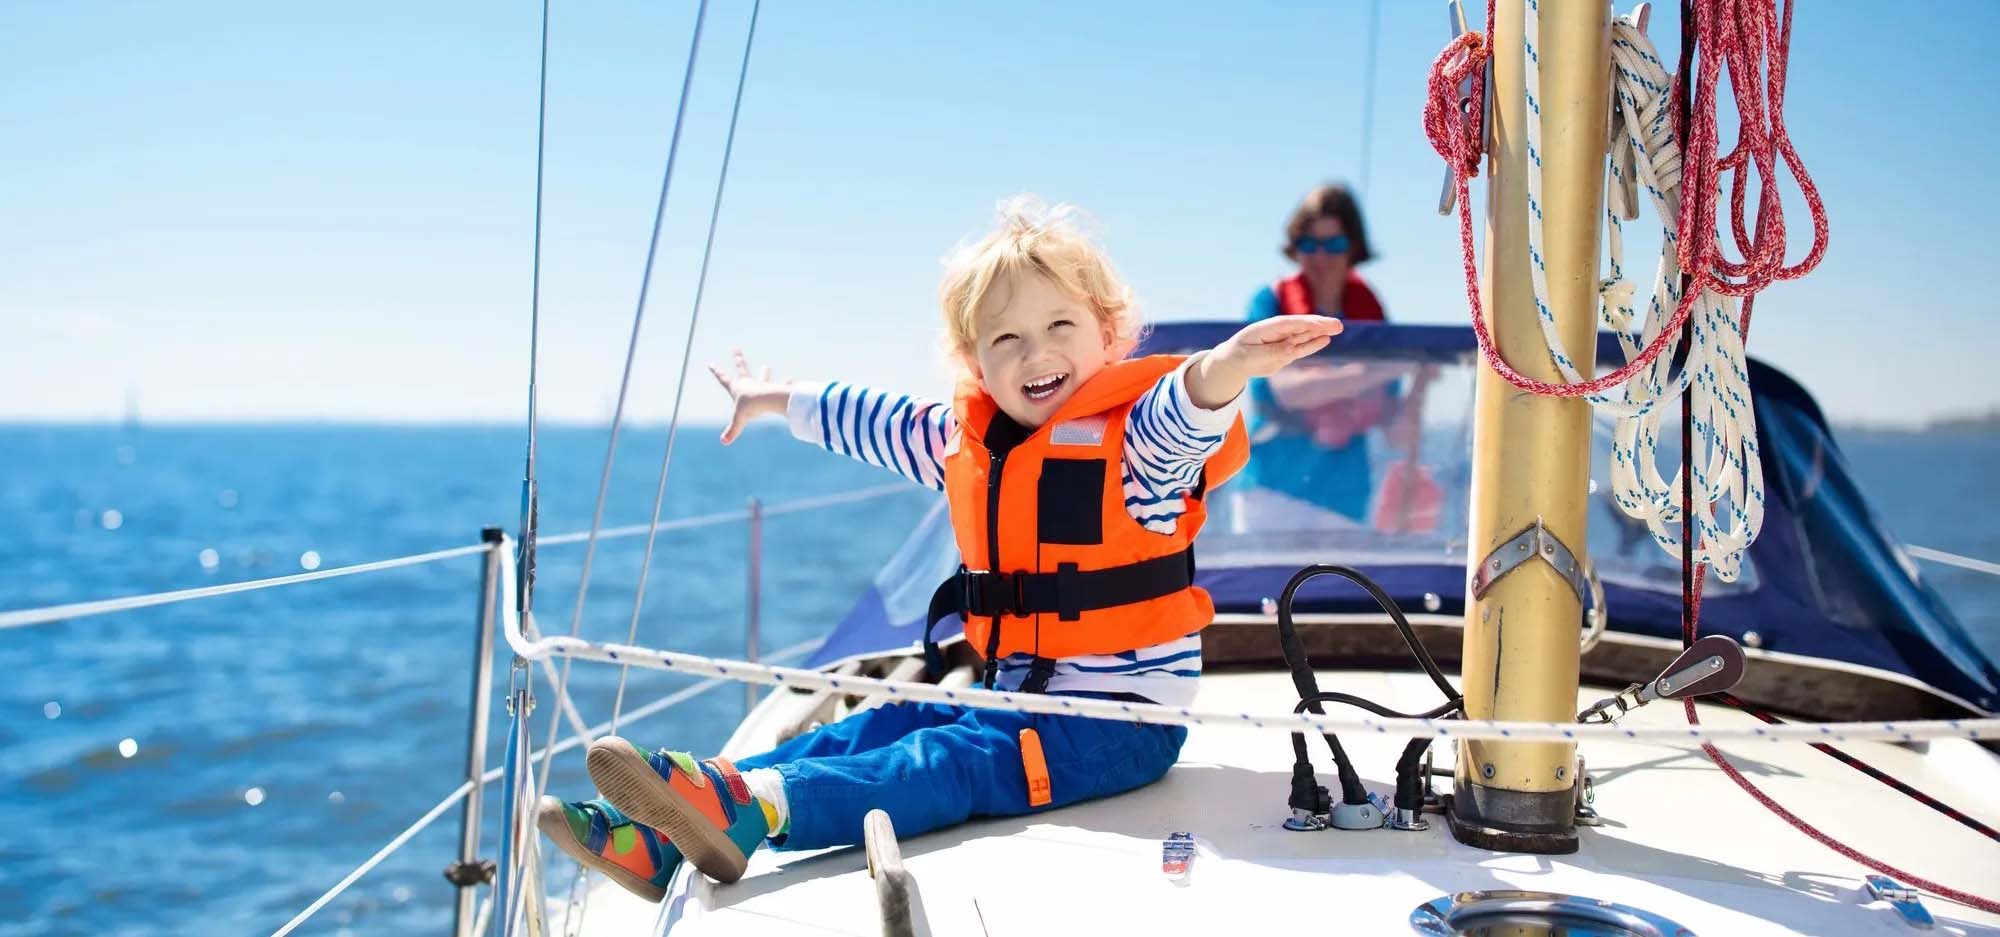 Young blonde child holding out arms like they are flying while sailing on a boat.